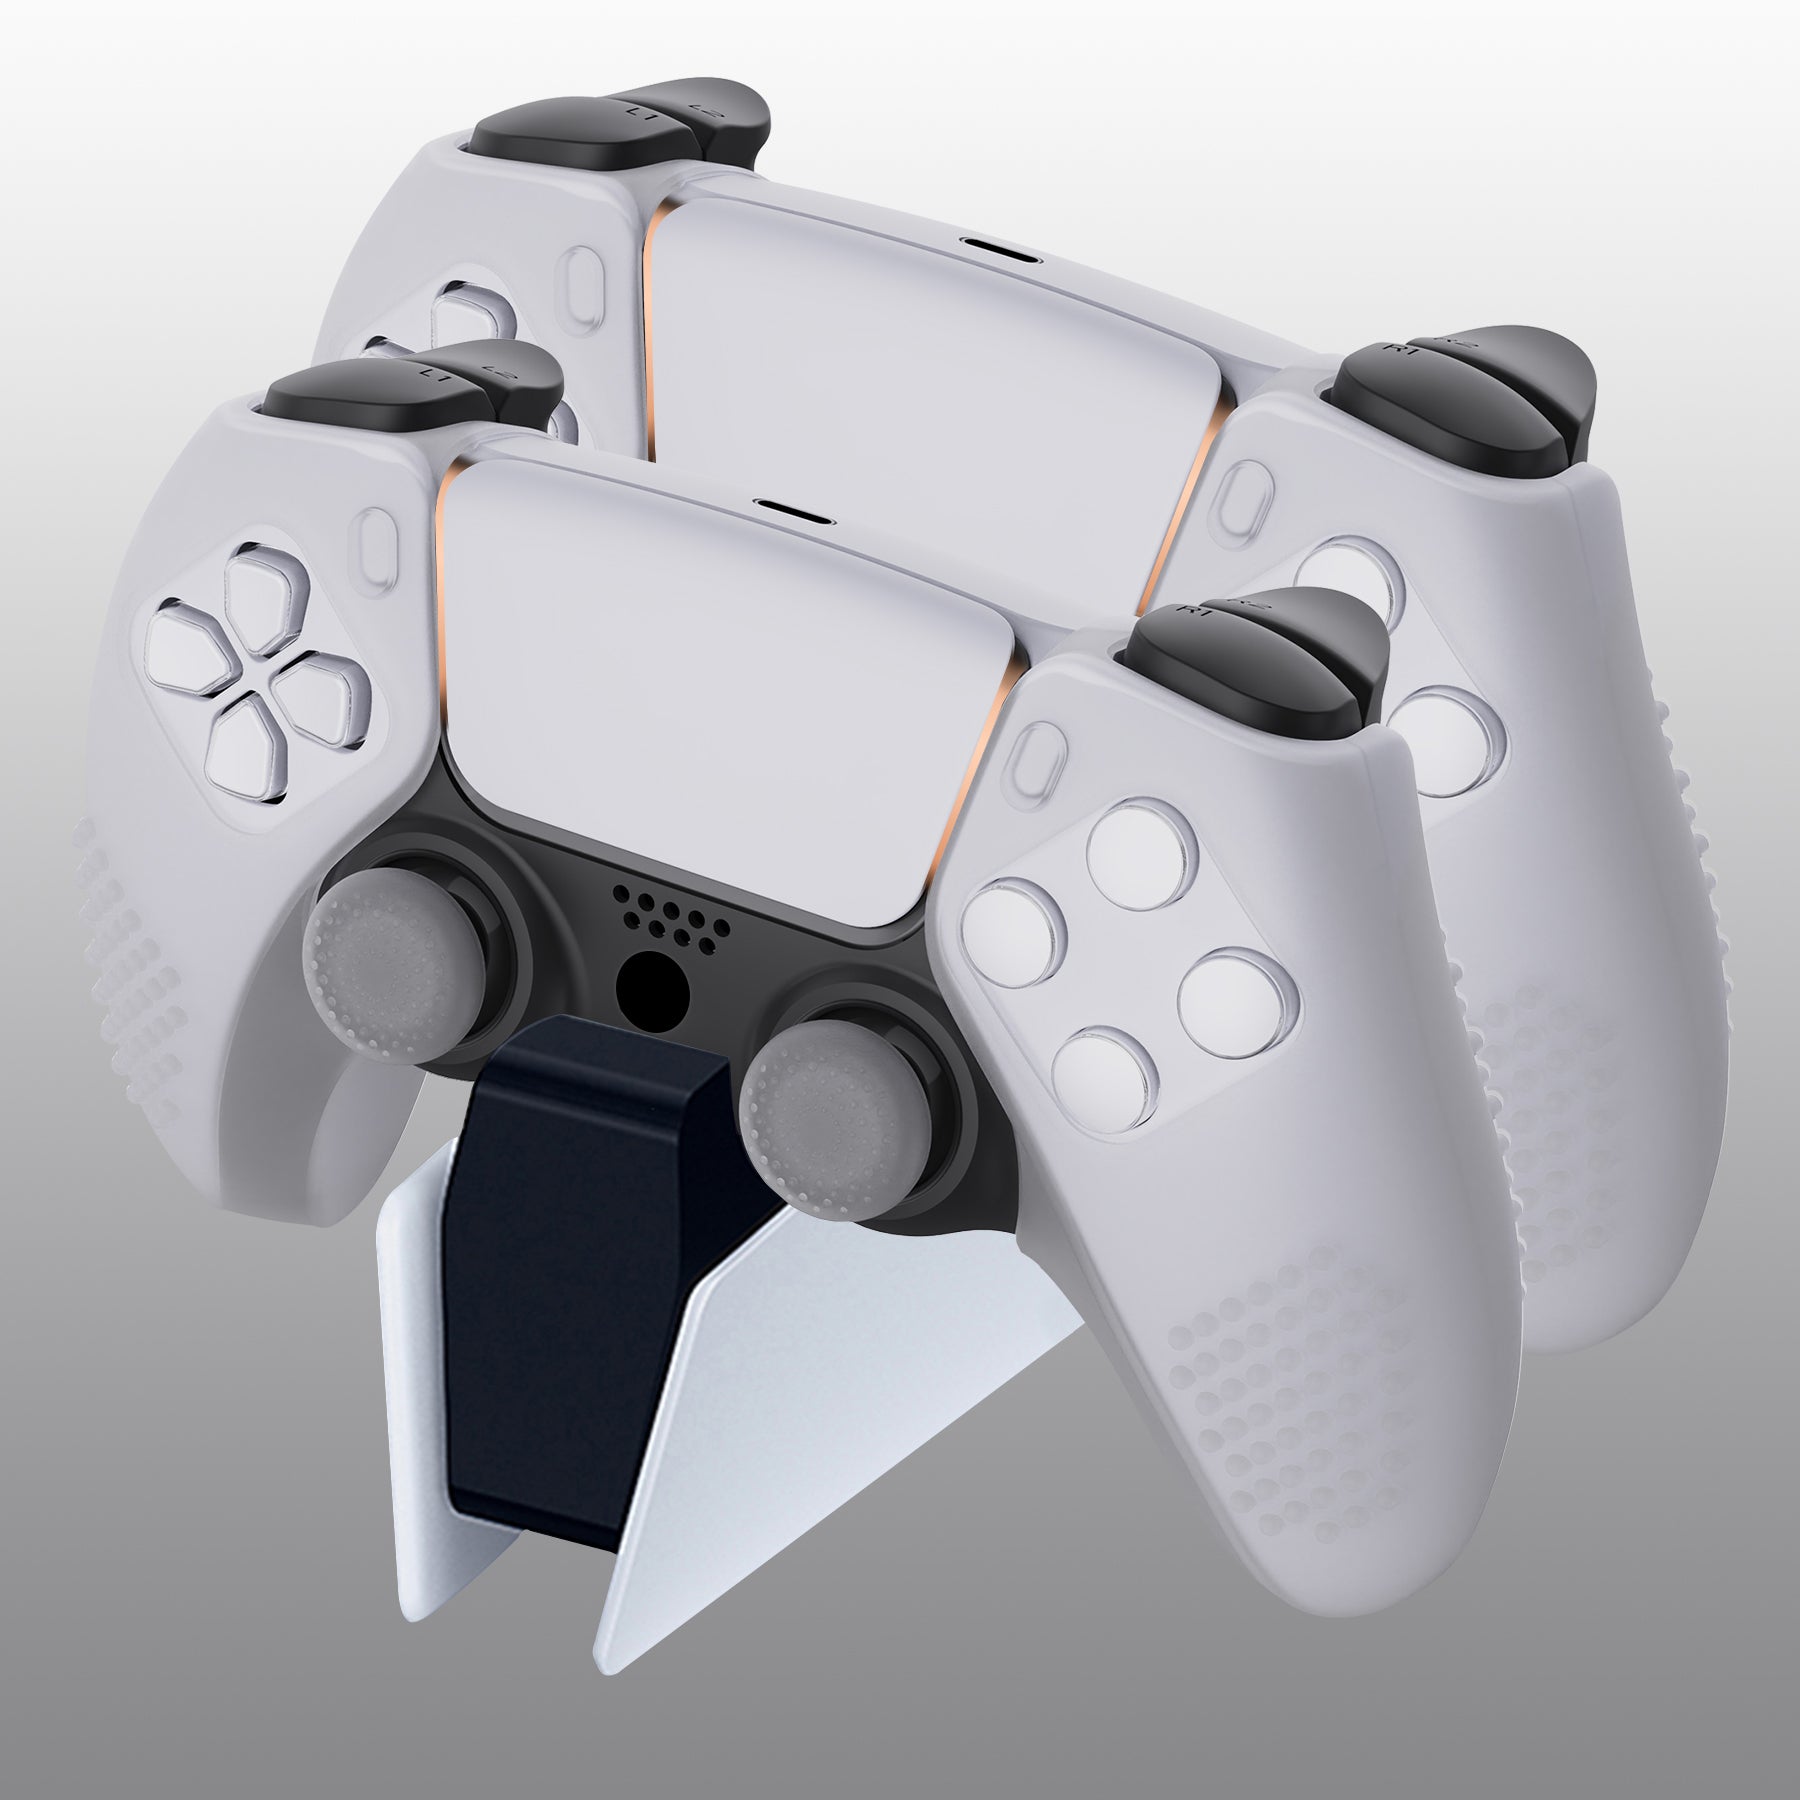 PlayVital 3D Studded Edition Anti-Slip Silicone Cover Skin with Thumb Grip Caps for PS5 Wireless Controller, Compatible with Charging Station - Clear White  - TDPF026 PlayVital